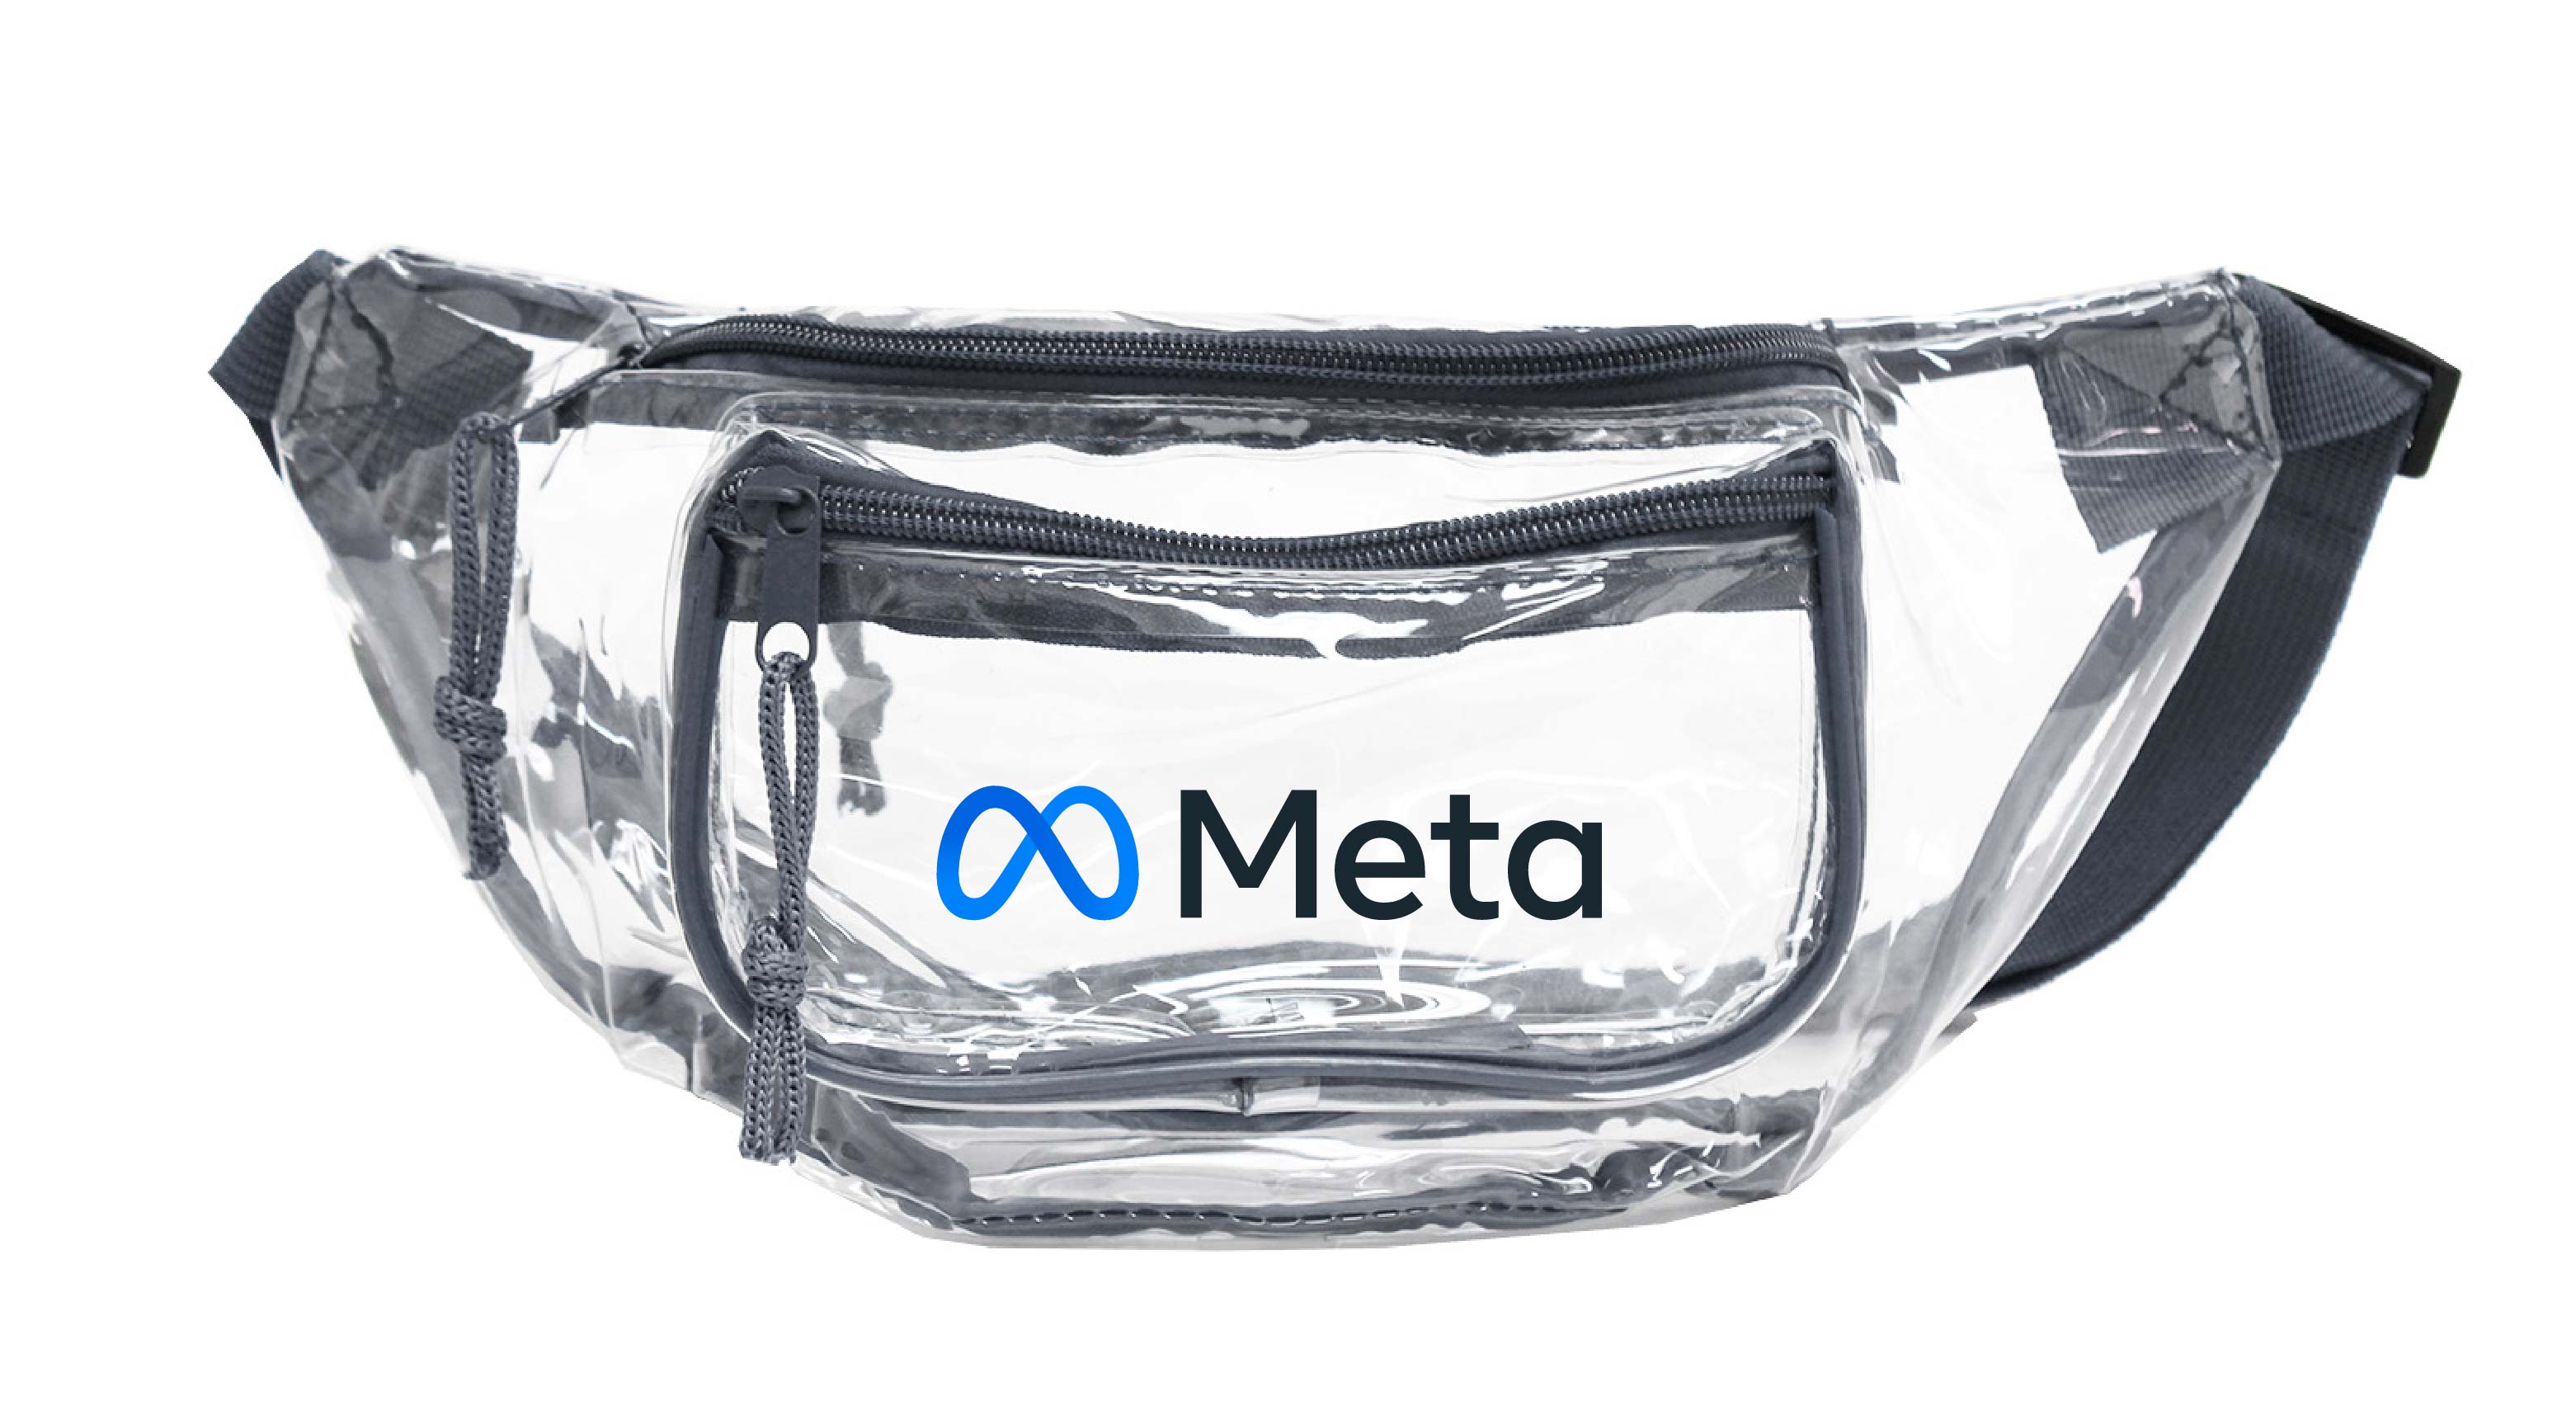 MULTI-COMPARTMENT STADIUM APPROVED CLEAR FANNY PACK